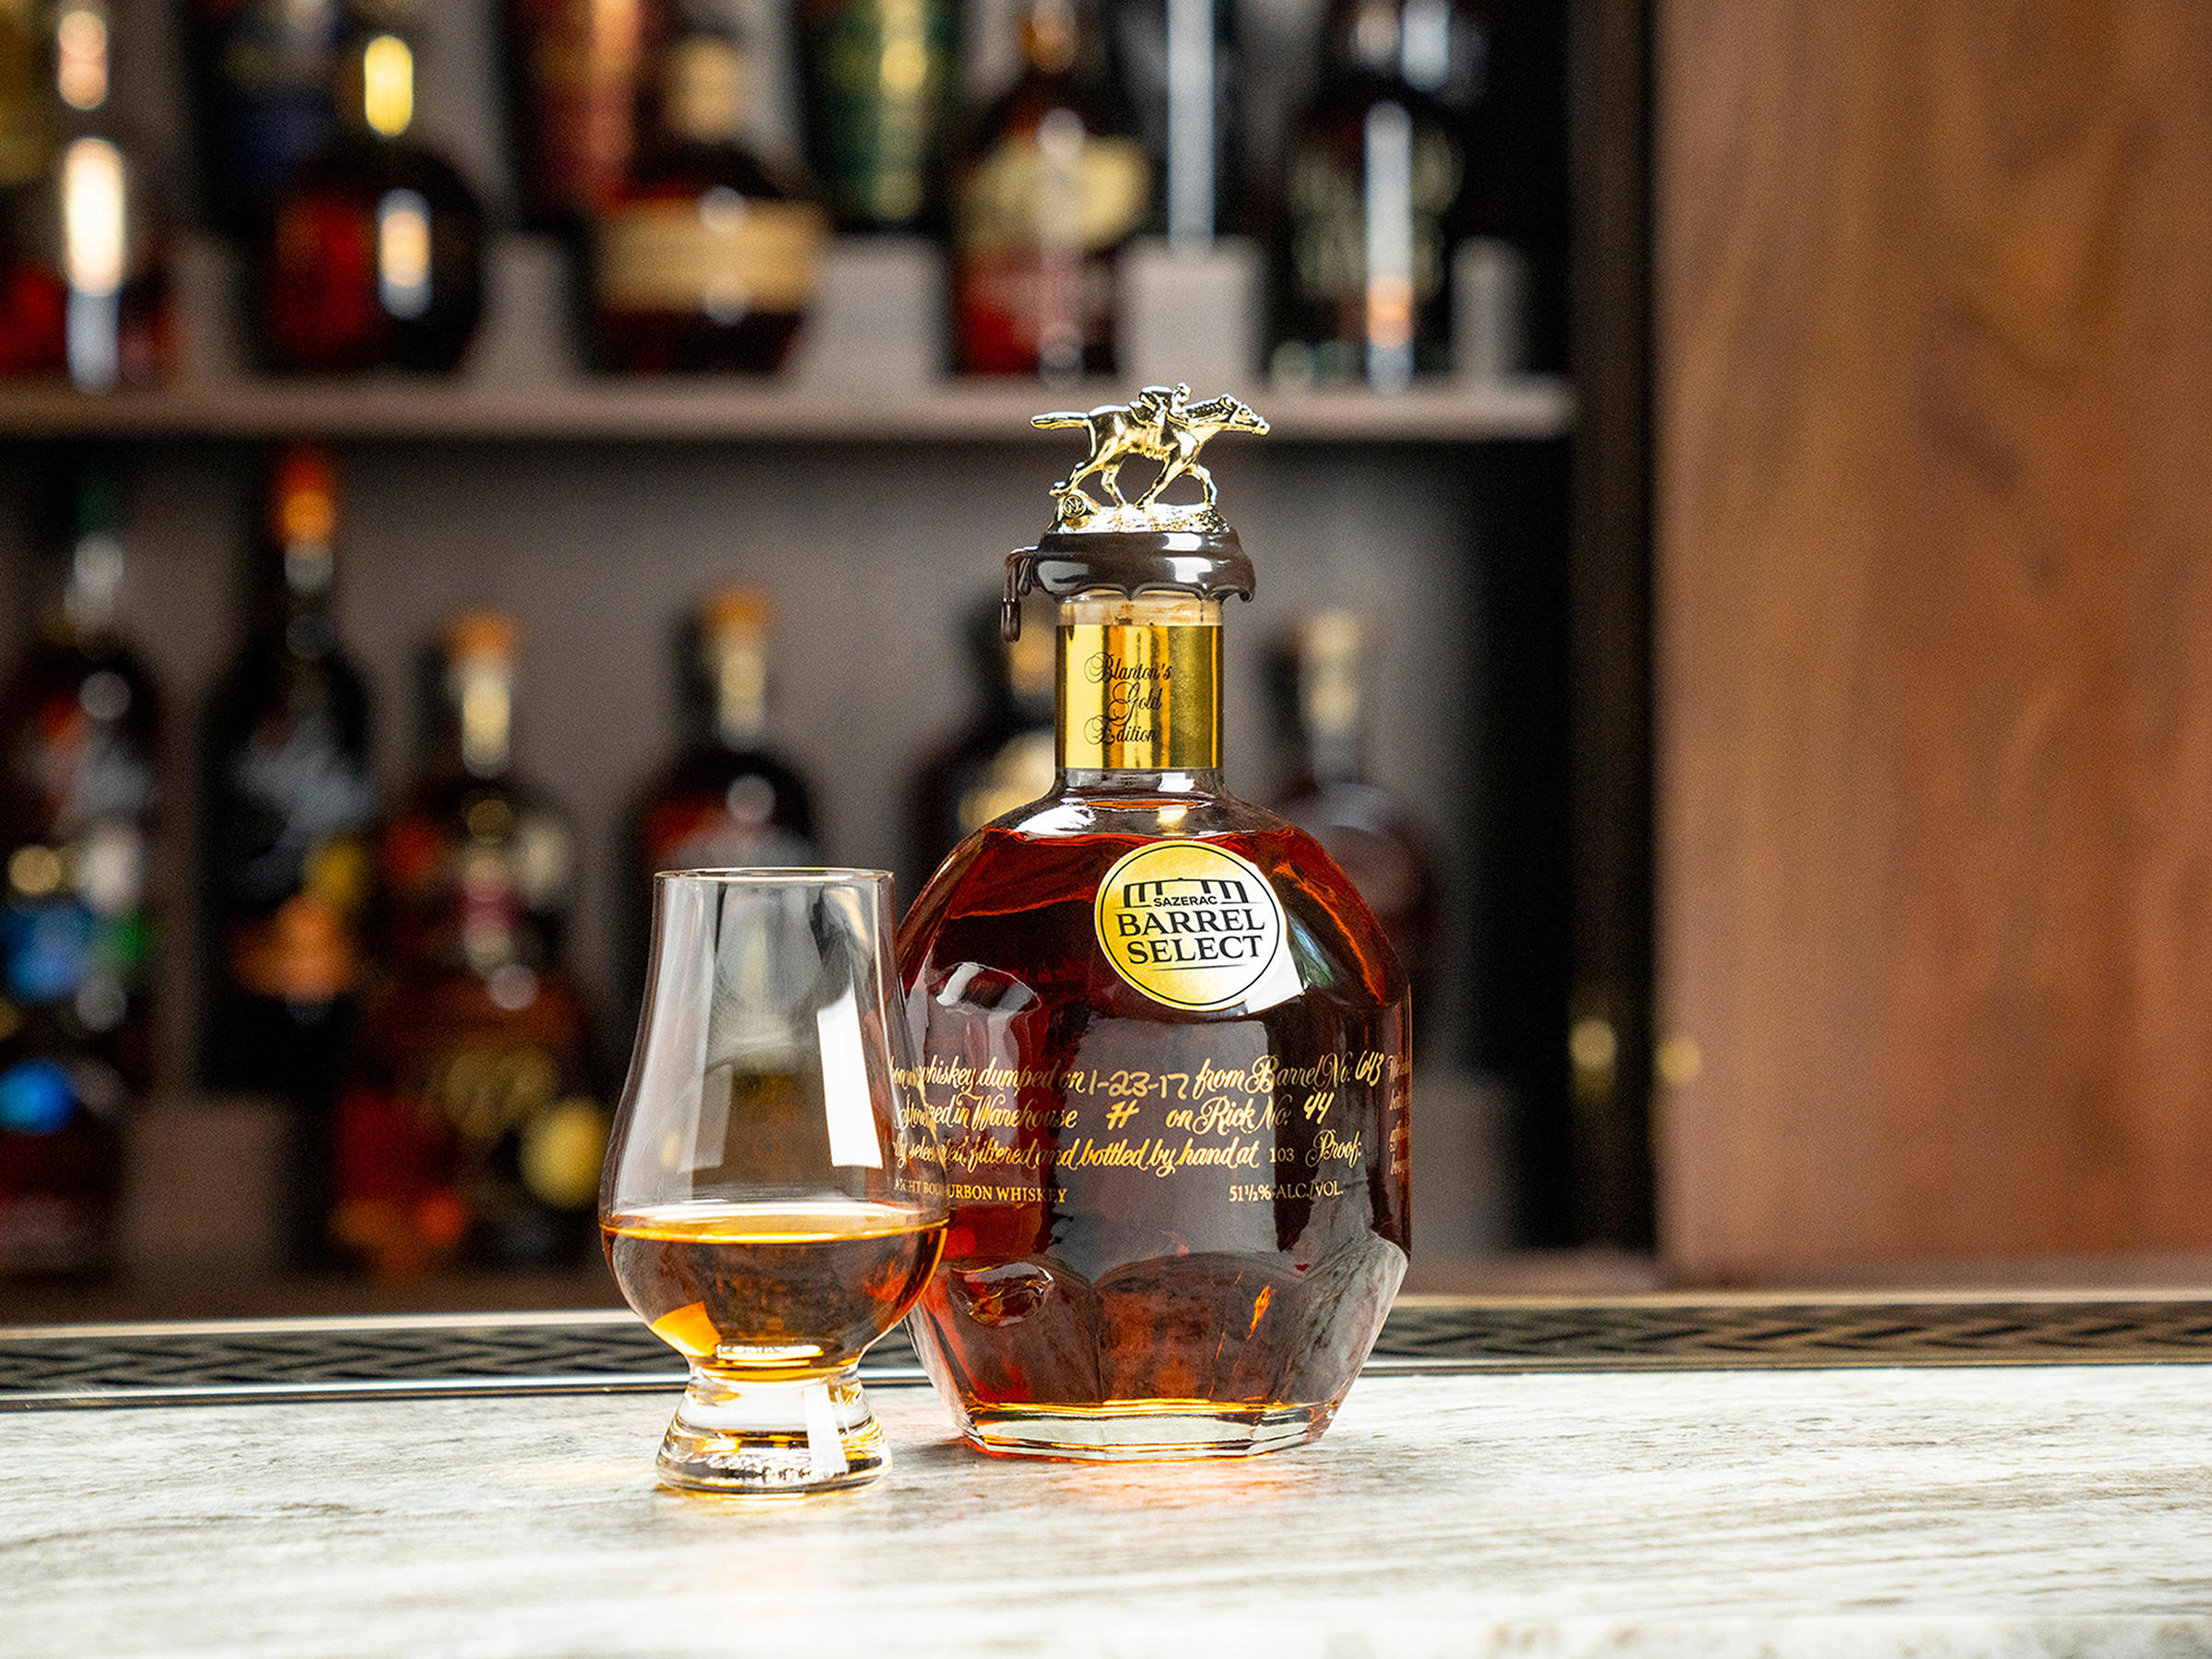 How to Win a Once in a Lifetime VIP Blanton’s Gold Barrel Selection Experience